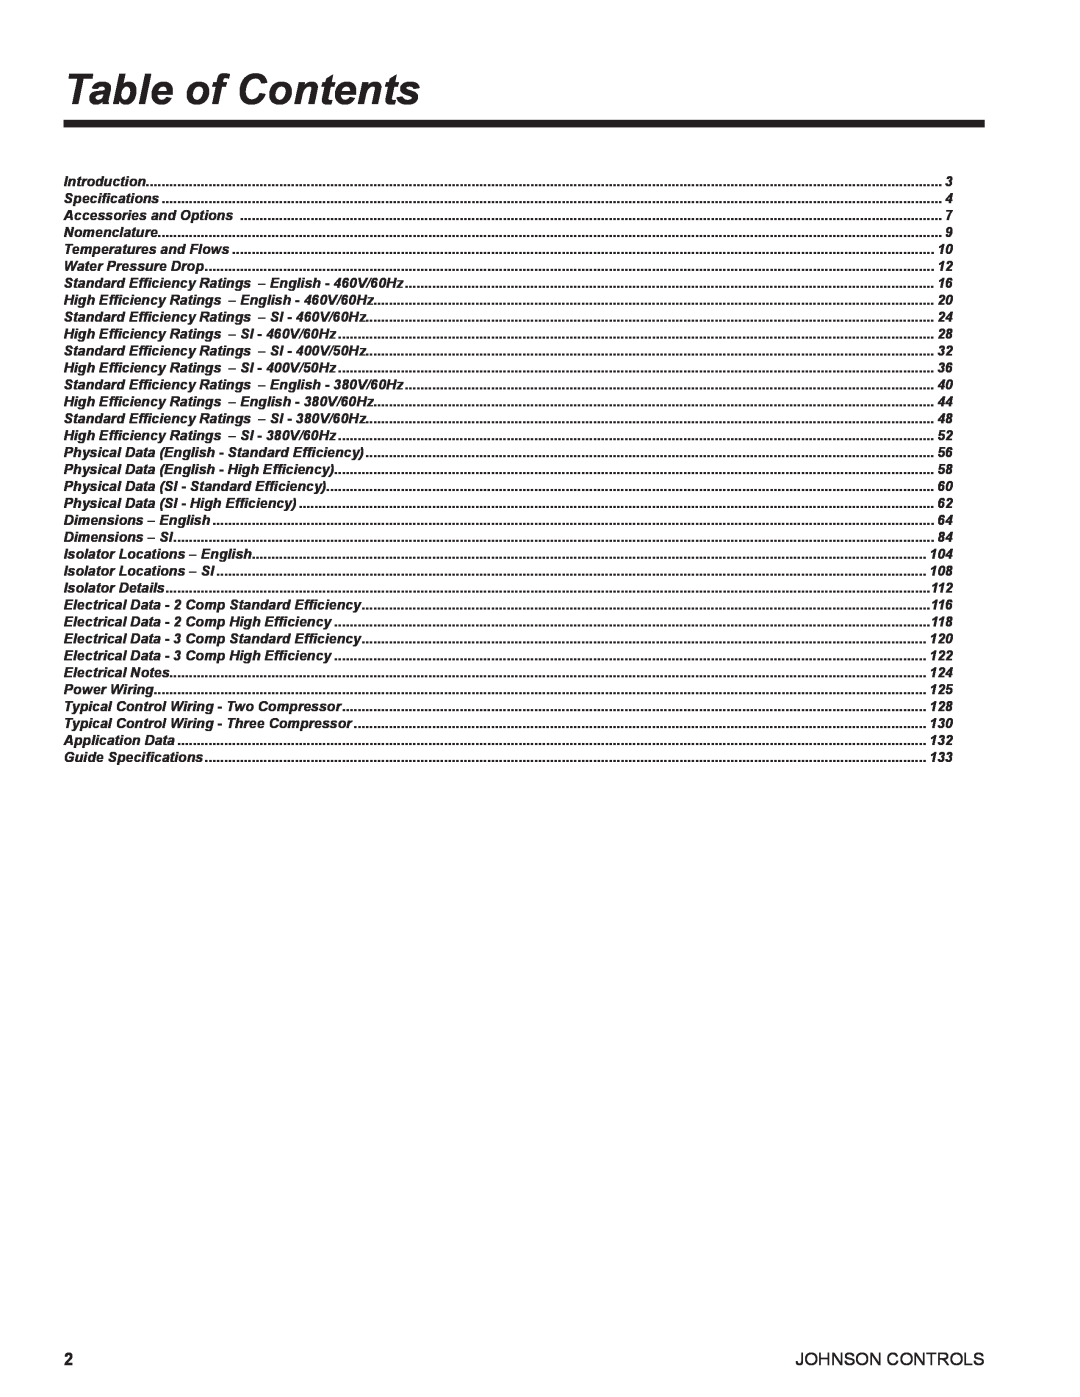 York R134A manual Table of Contents, Johnson Controls 